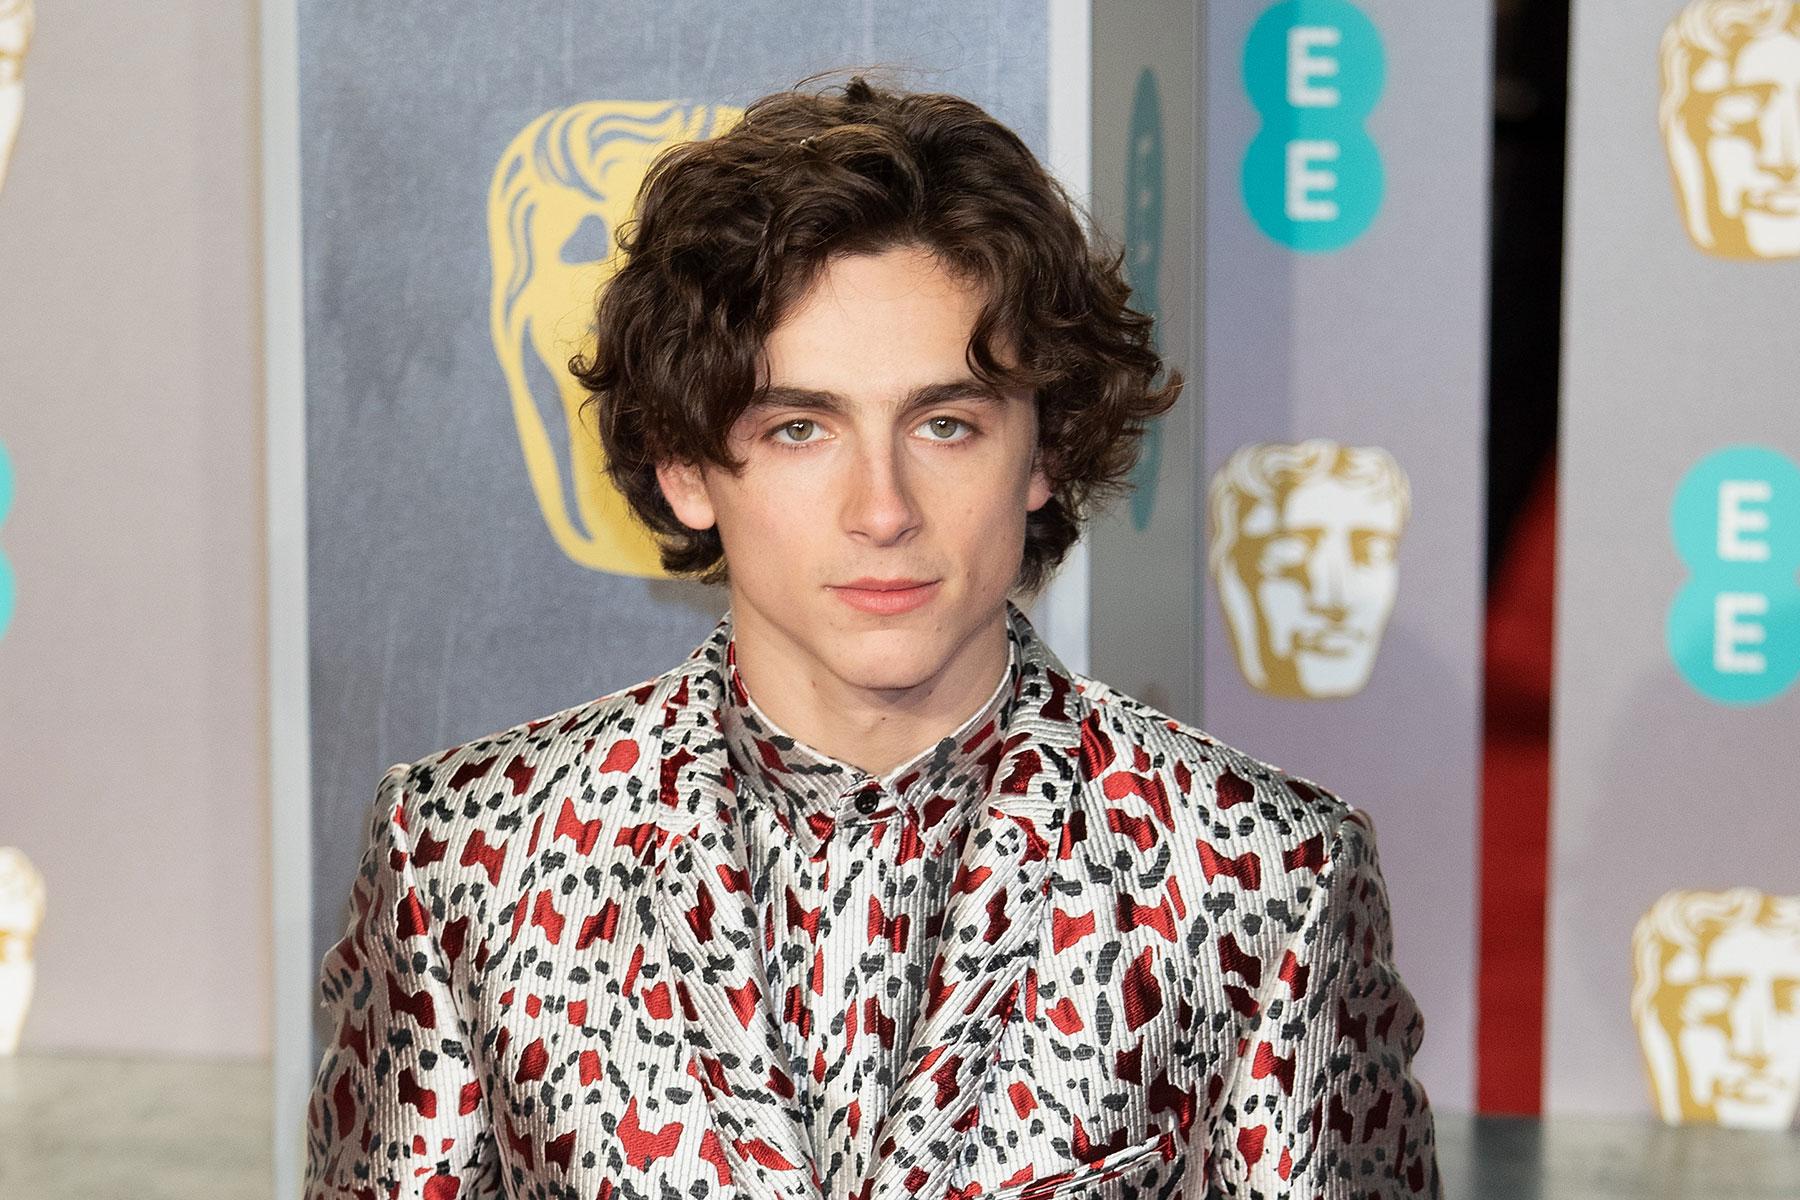 Timothée Chalamet in talks to play Bob Dylan in new biopic – report - www.hollywood.com